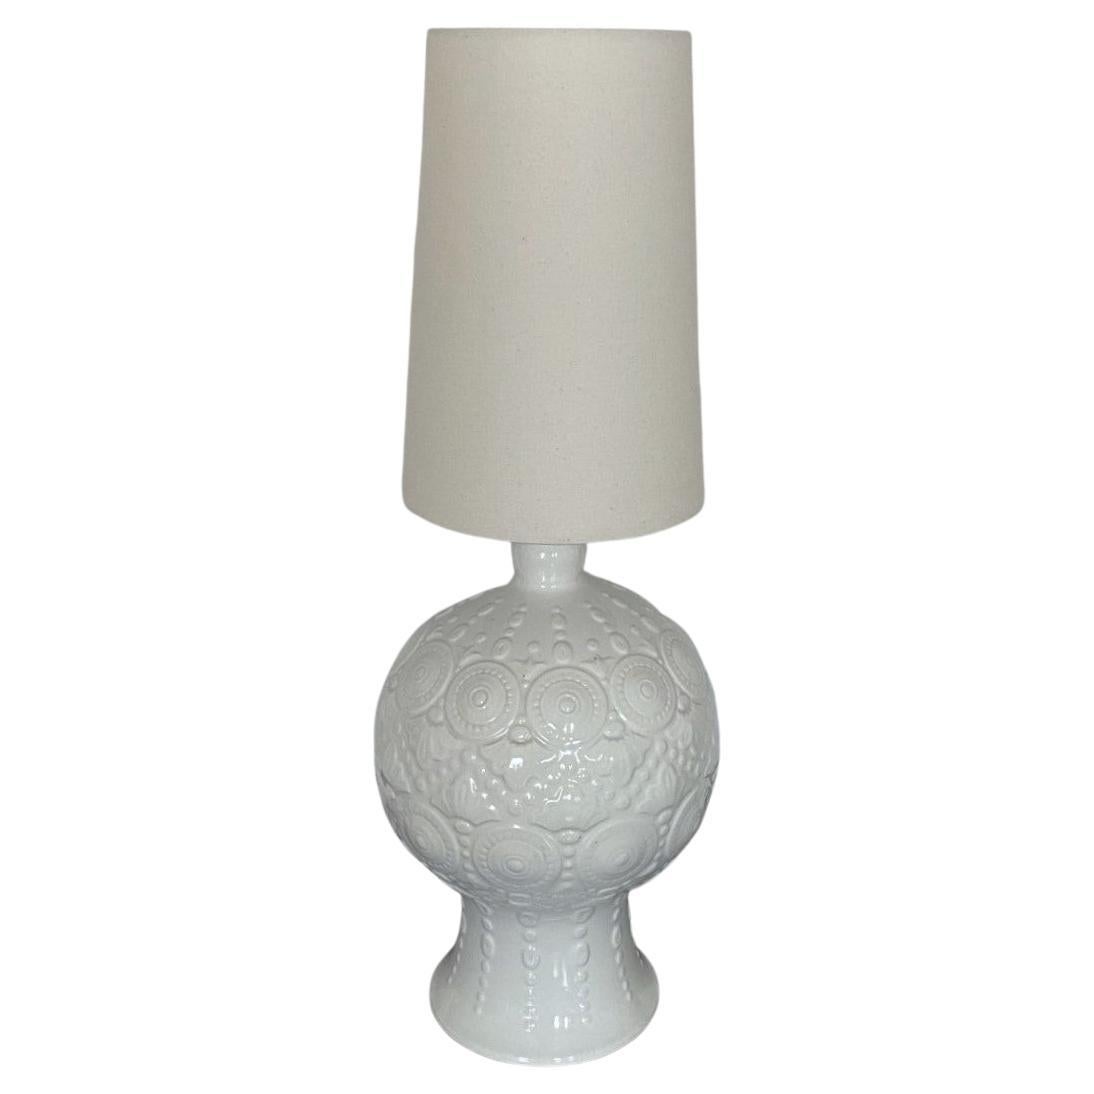 Spanish Hand-Crafted Glazed Ceramic Table Lamp White Textured Relief, 1970s  For Sale